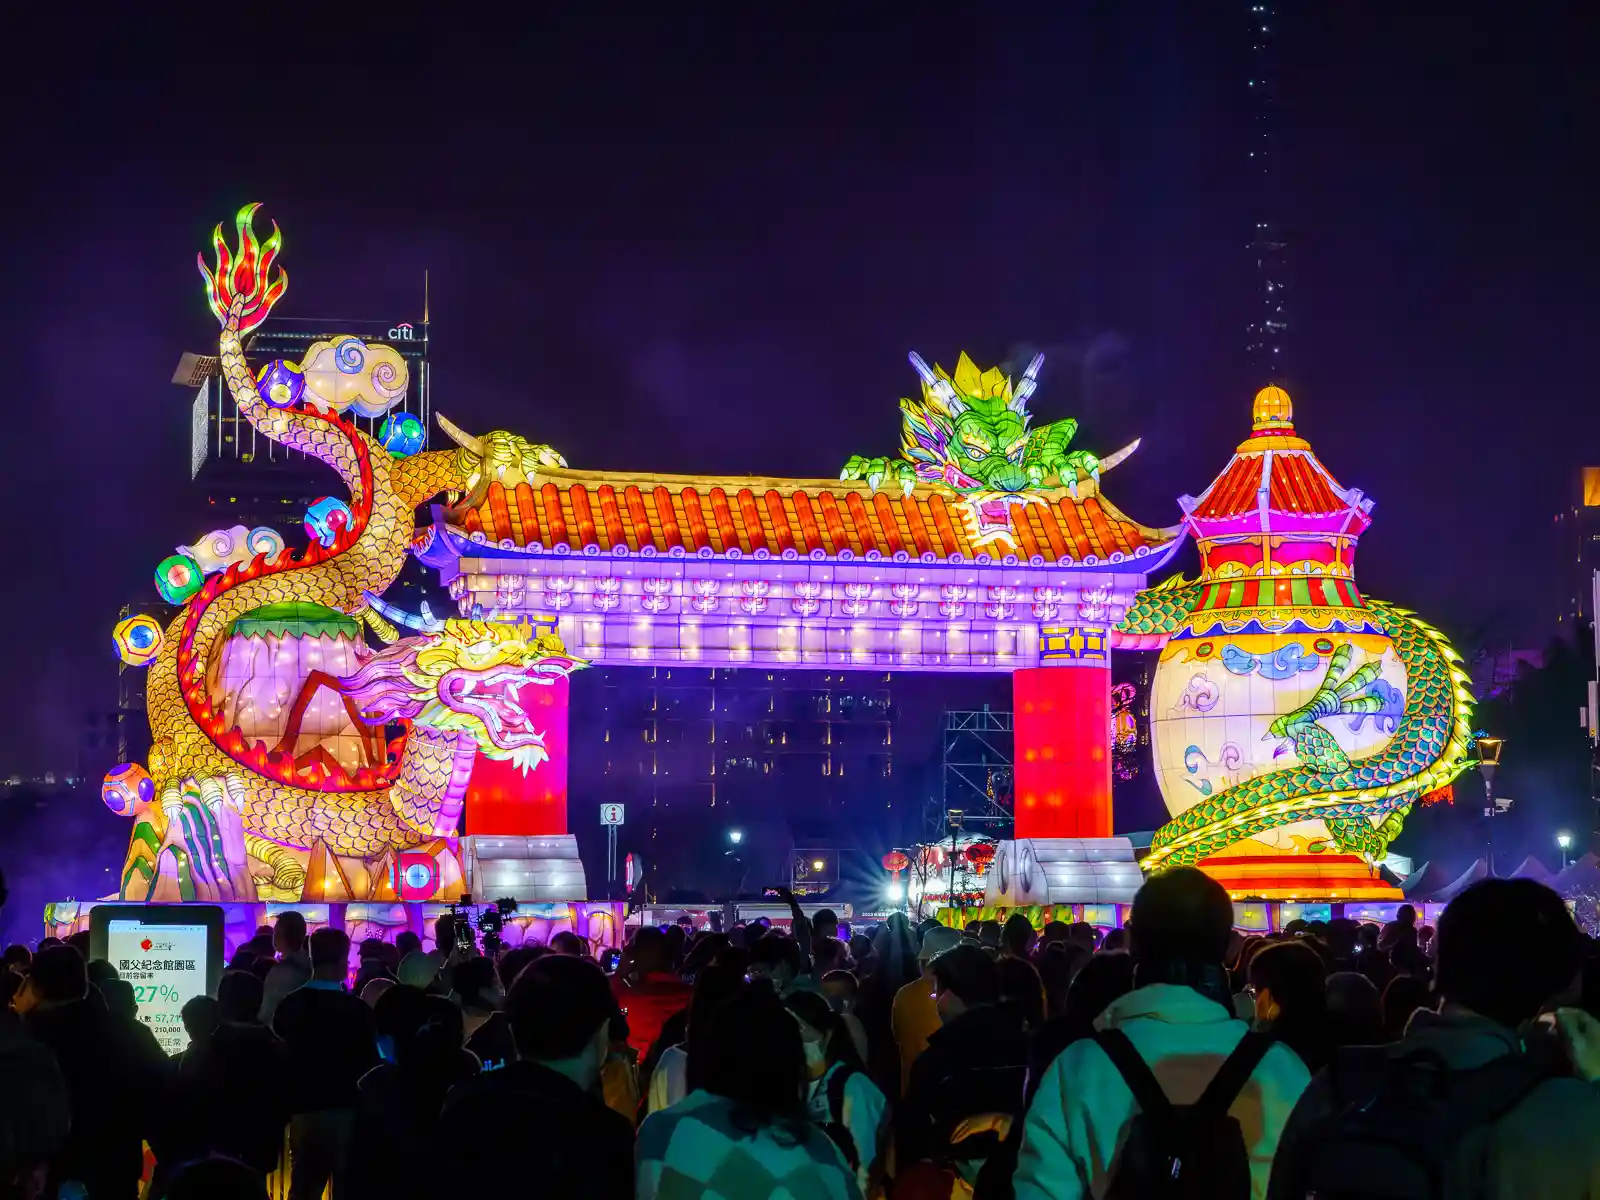 A lantern that is the size of a massive temple gate features two animated dragons.